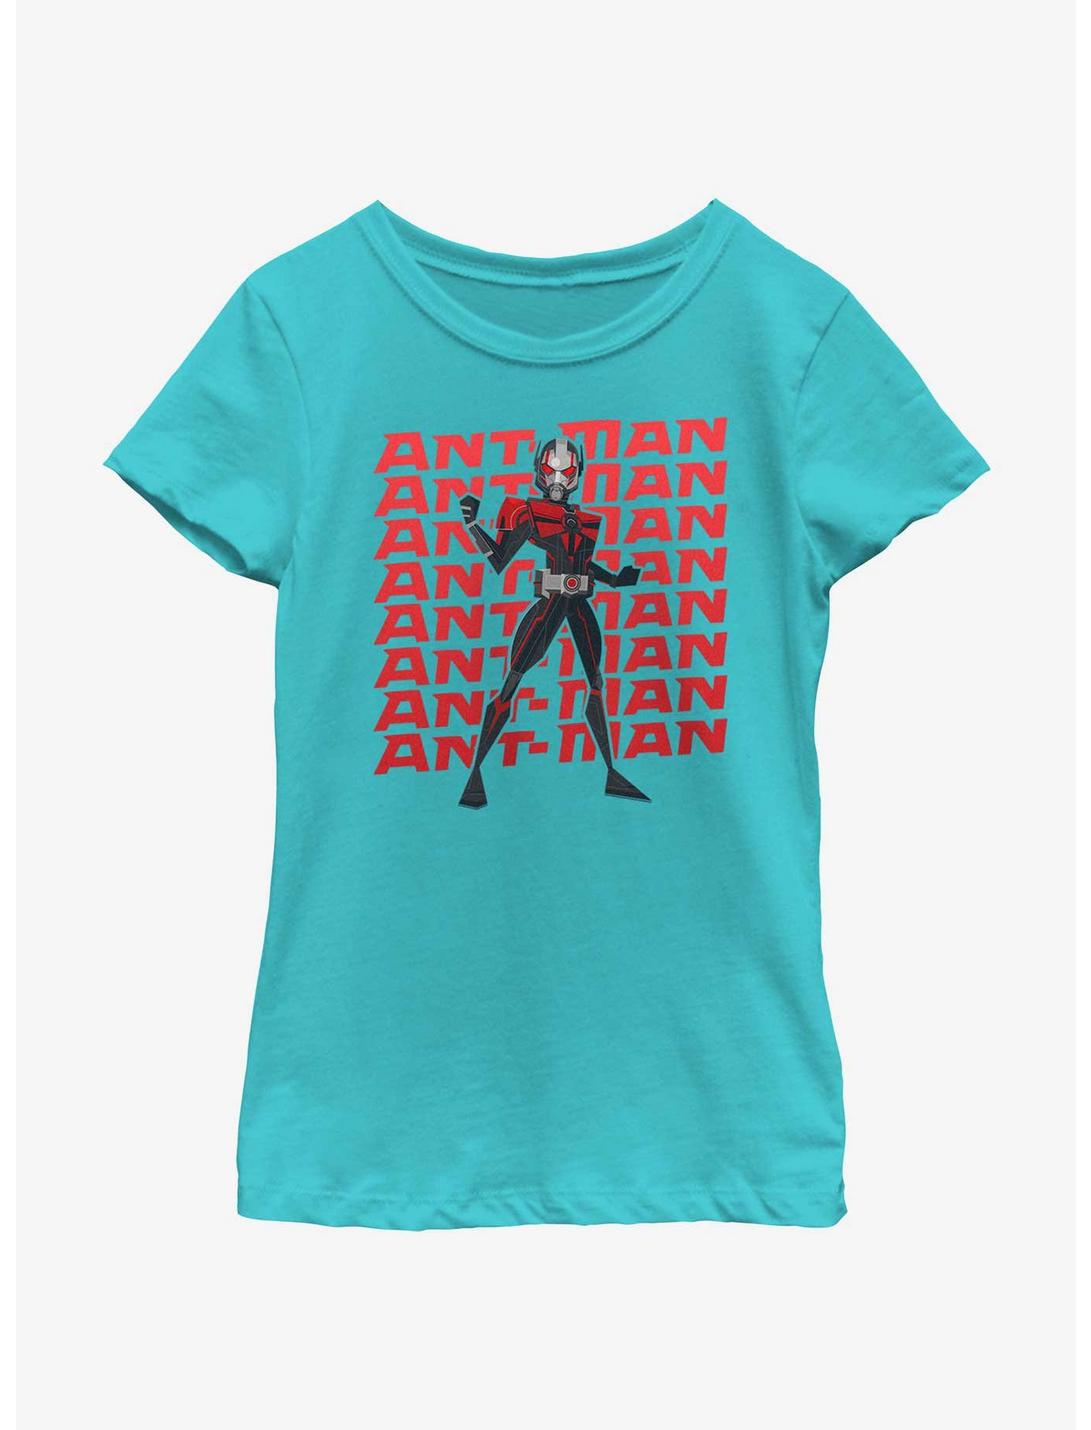 Marvel Ant-Man and the Wasp: Quantumania Action Pose Youth Girls T-Shirt, TAHI BLUE, hi-res